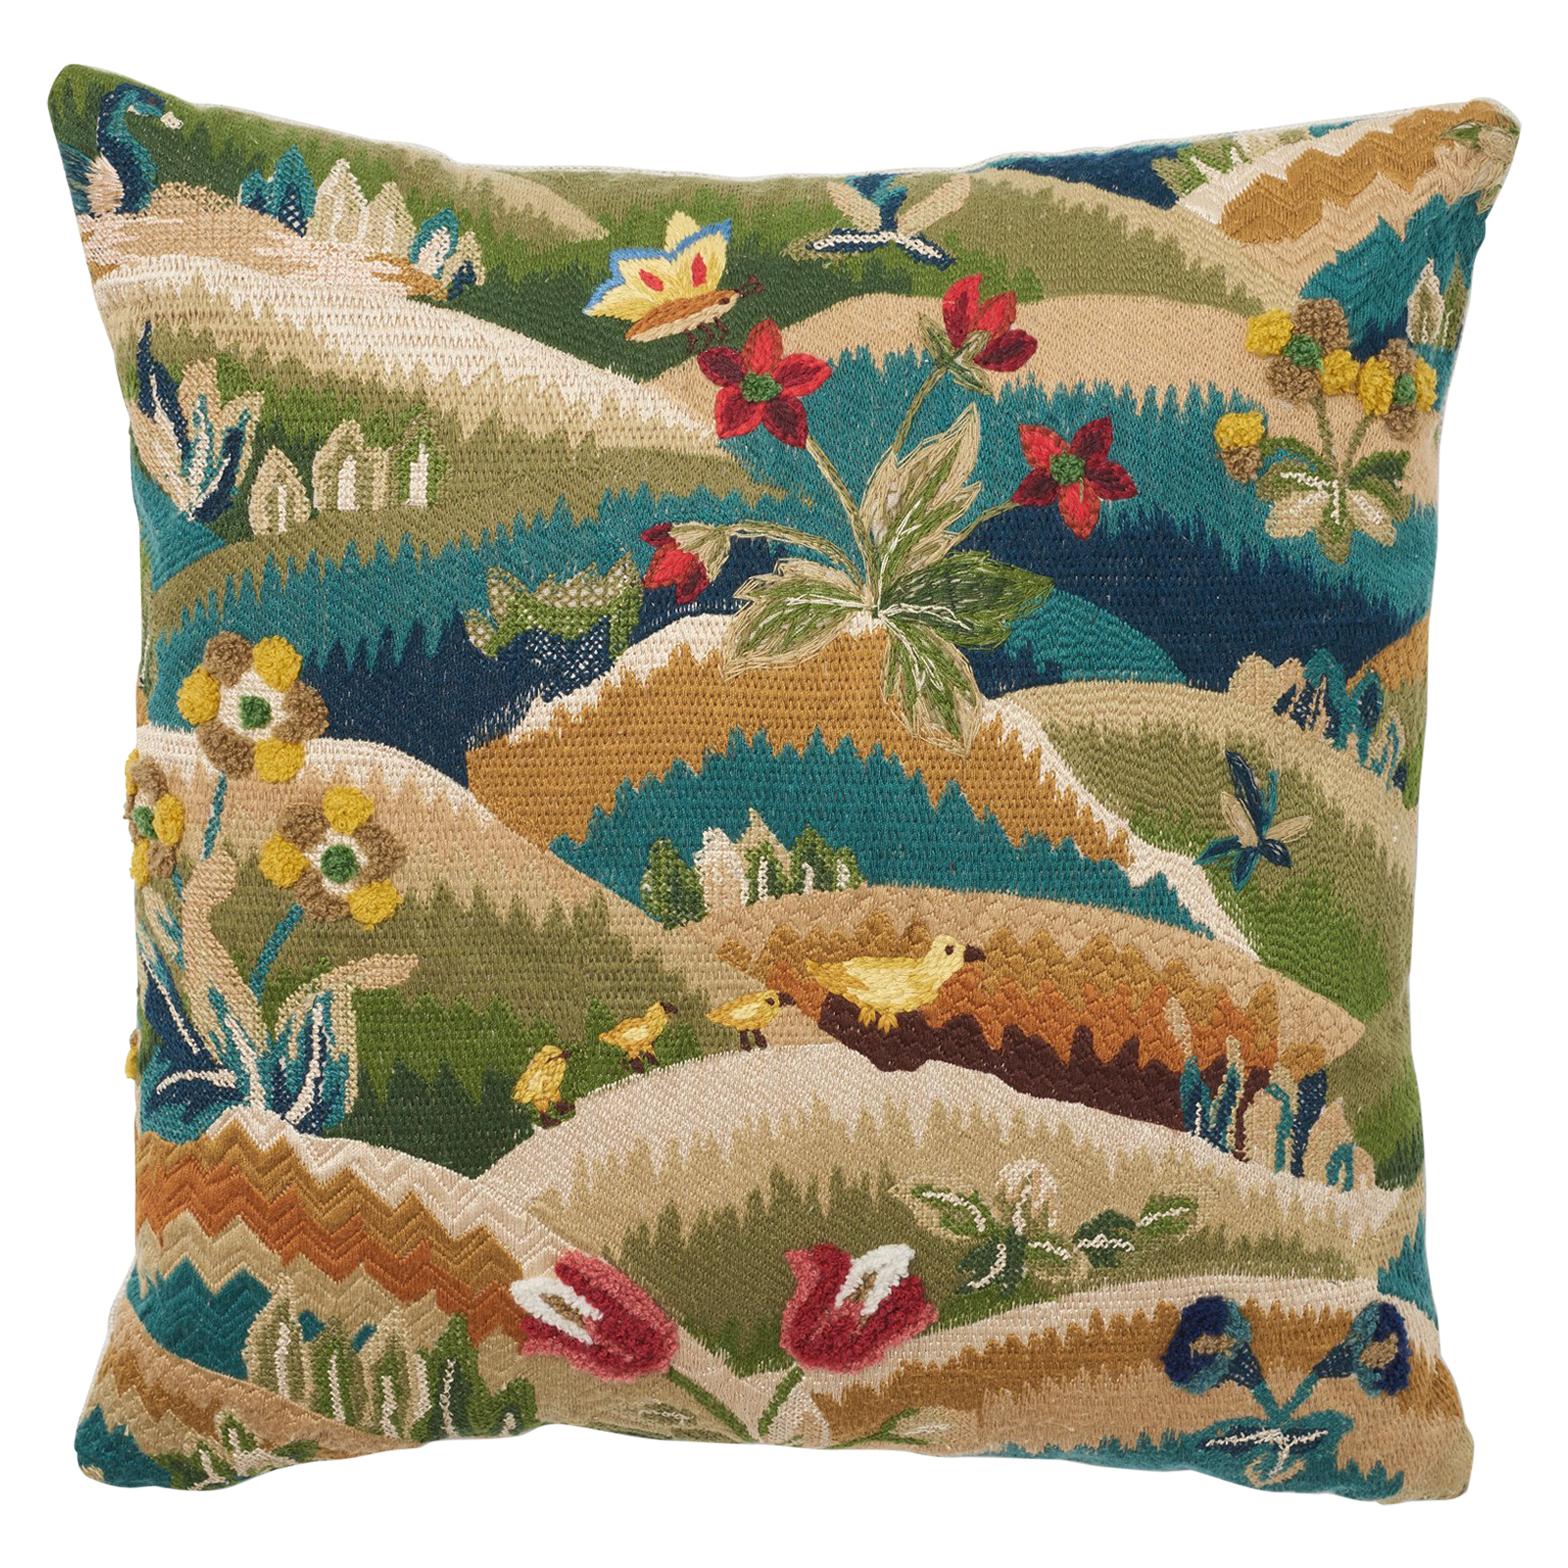 Schumacher Gerry Embroidery Hand-Stitched Multi-Color Two-Sided Pillow